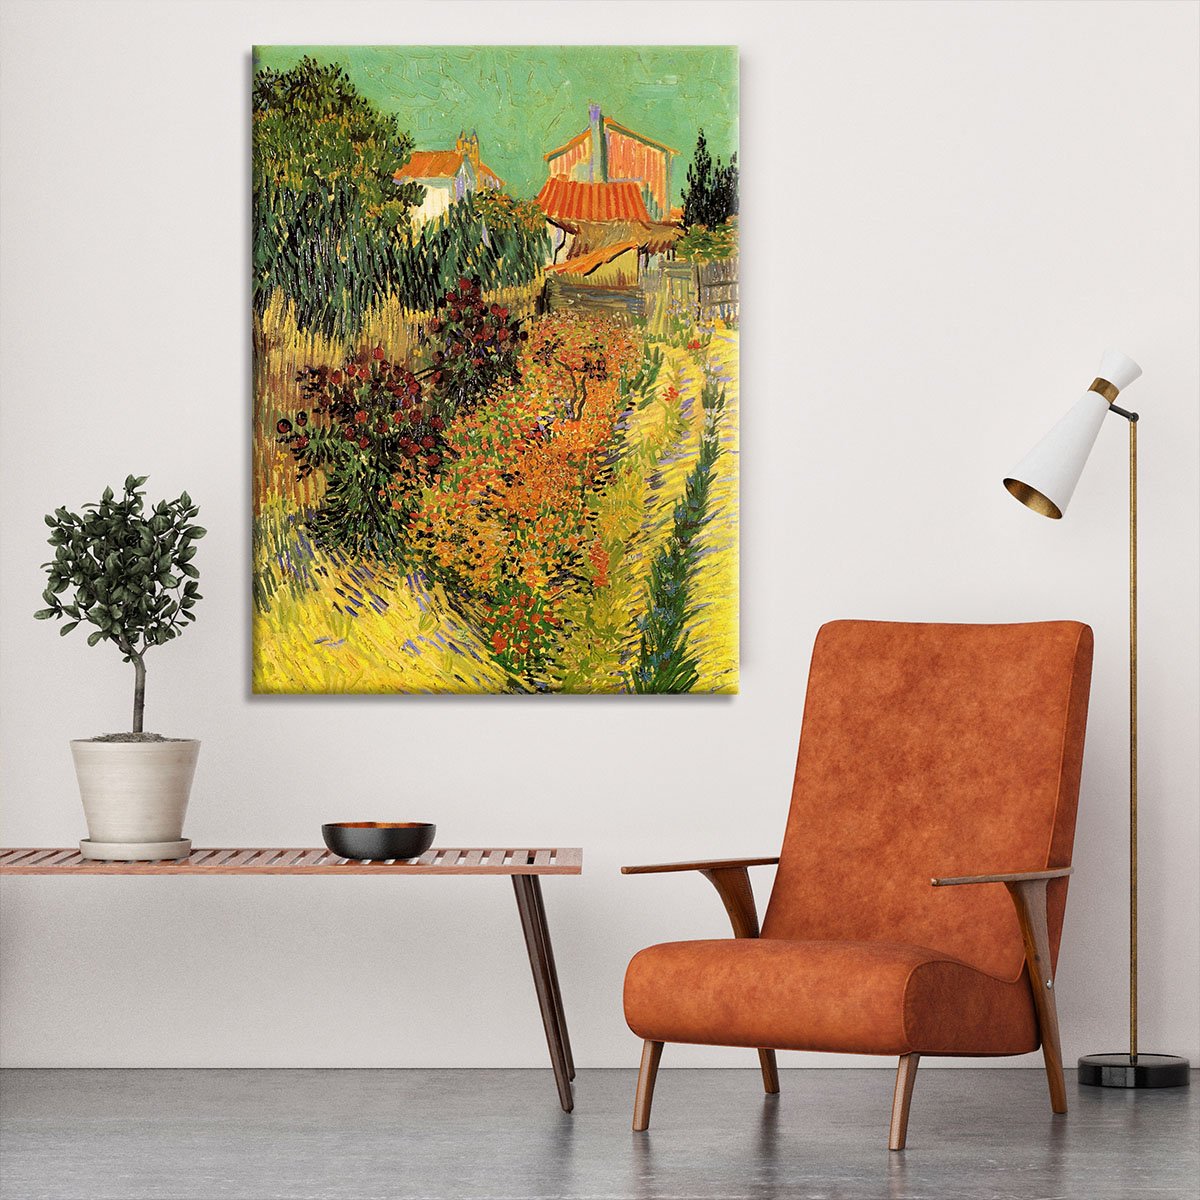 Garden Behind a House by Van Gogh Canvas Print or Poster